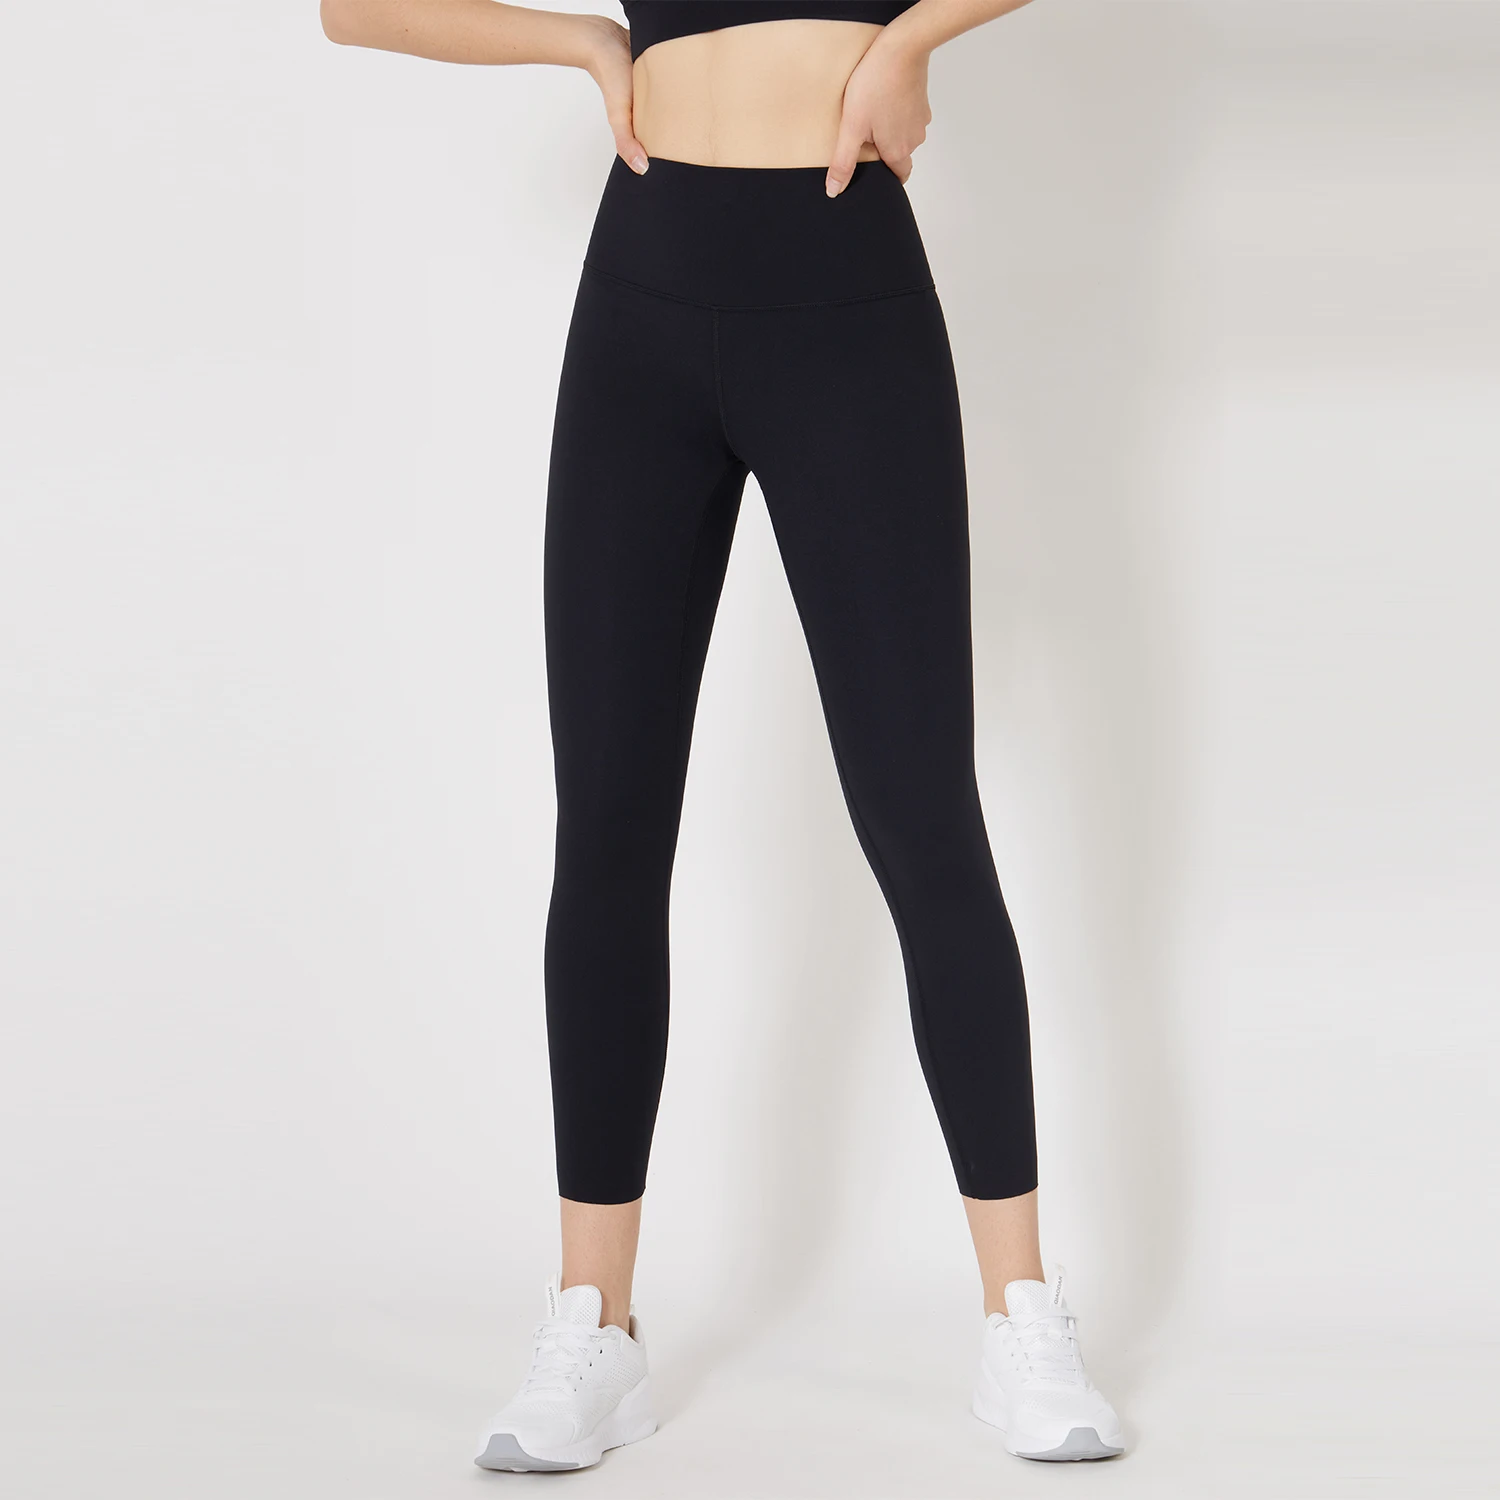 high waisted fitness leggings with back